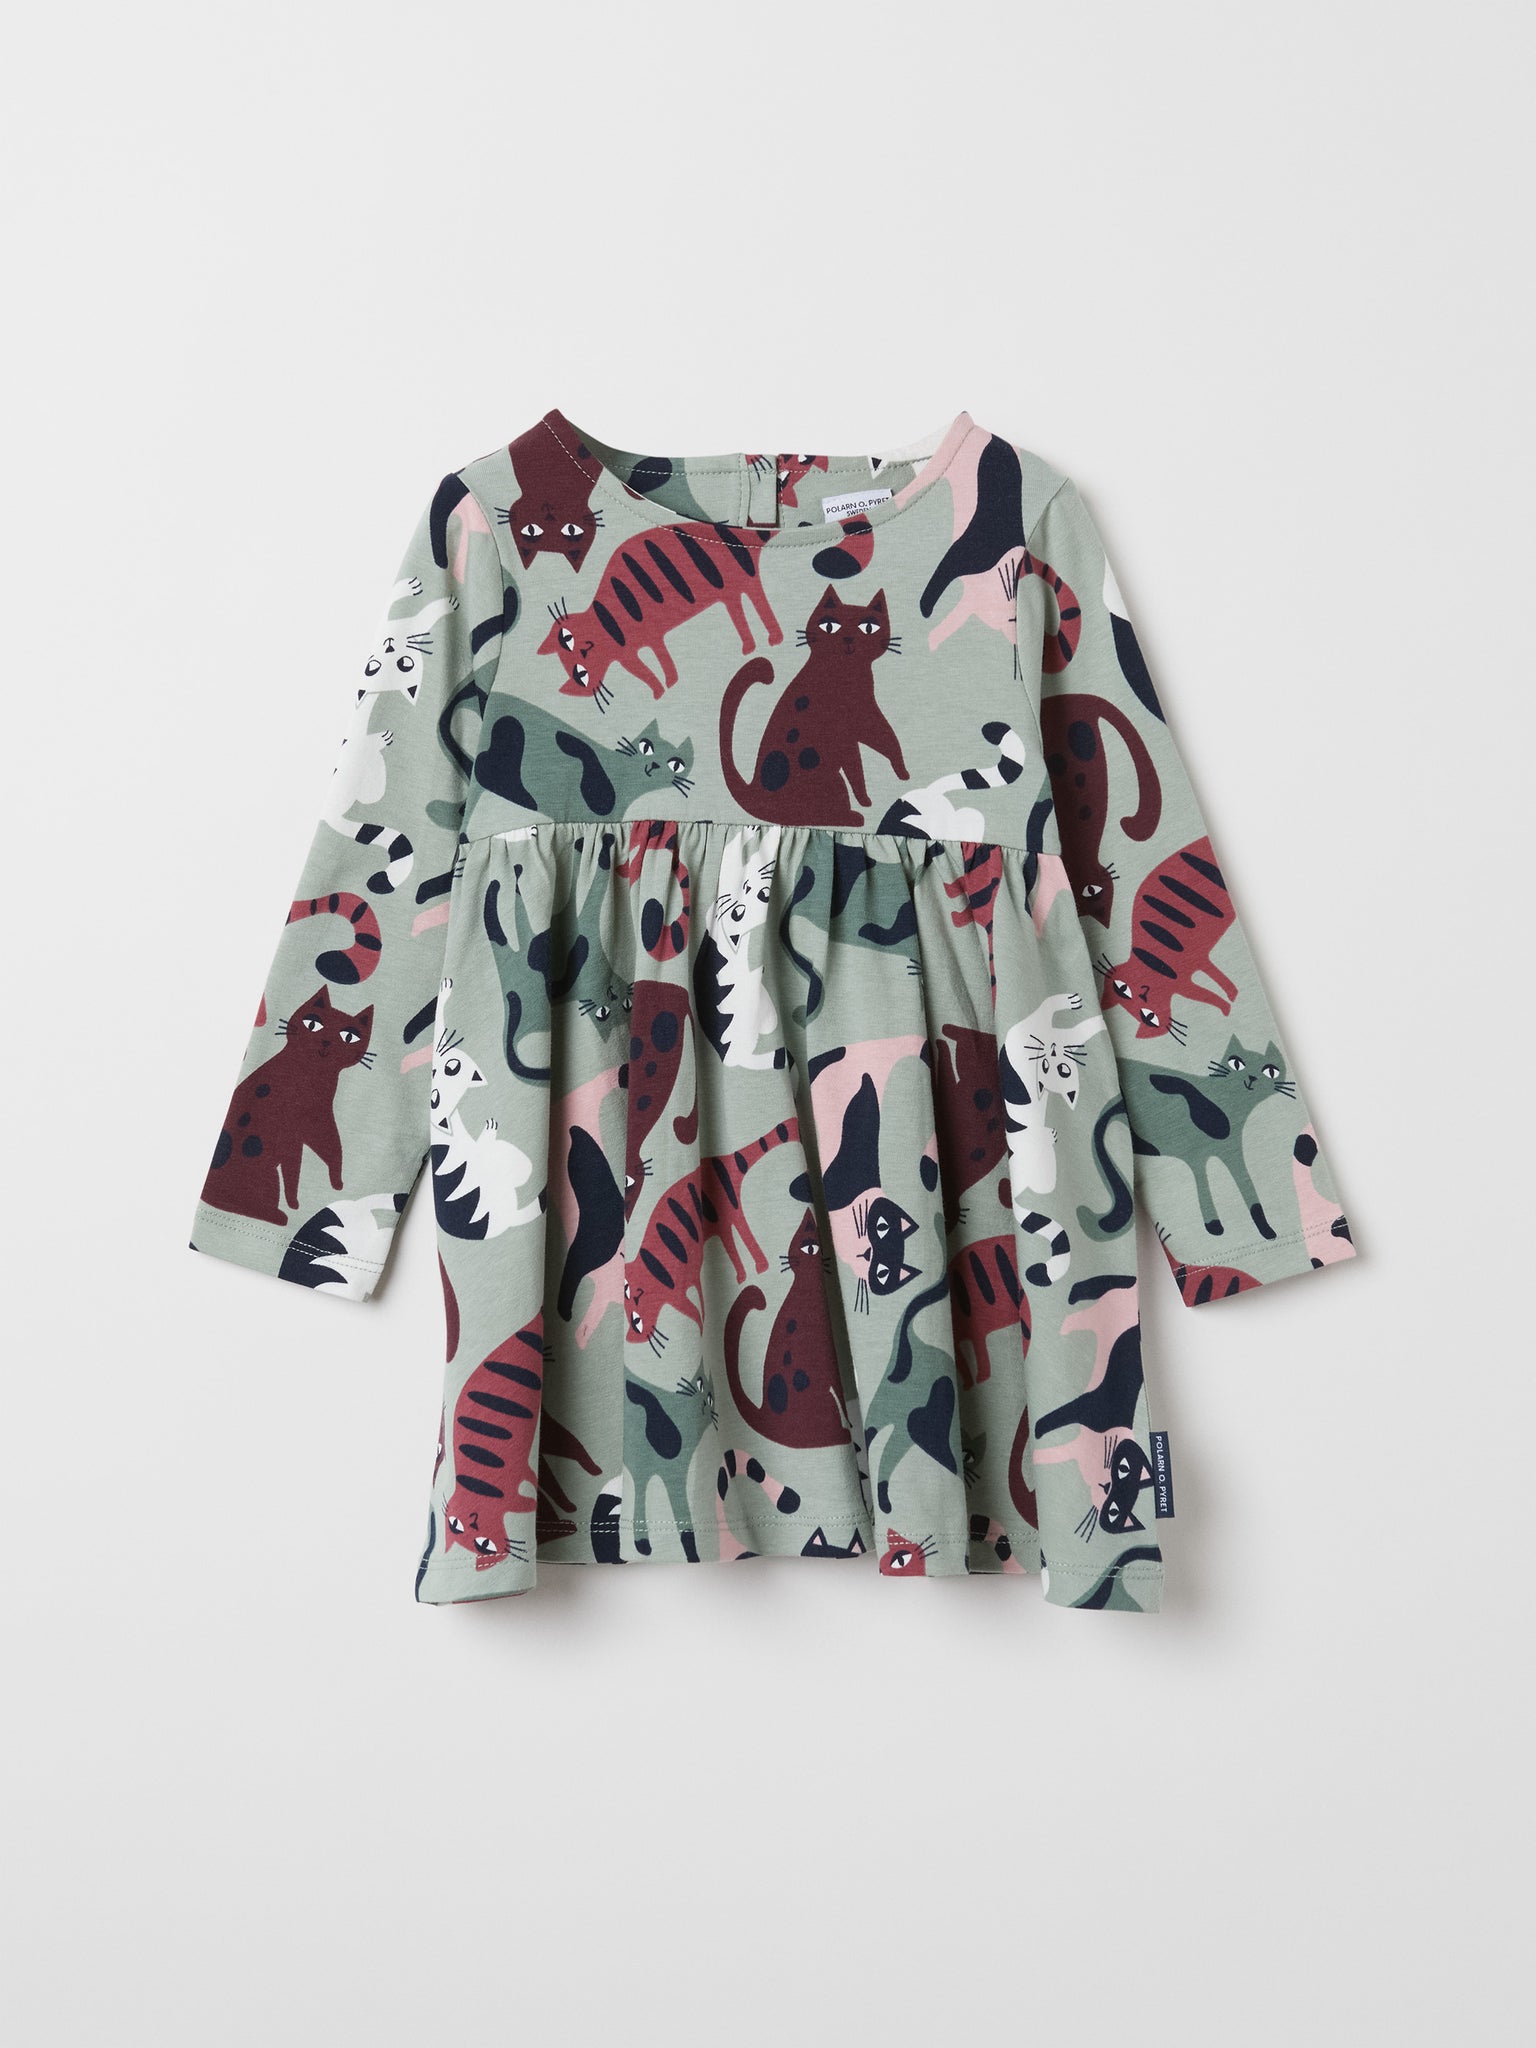 Cat Print Organic Cotton Kids Dress from the Polarn O. Pyret kidswear collection. Nordic kids clothes made from sustainable sources.